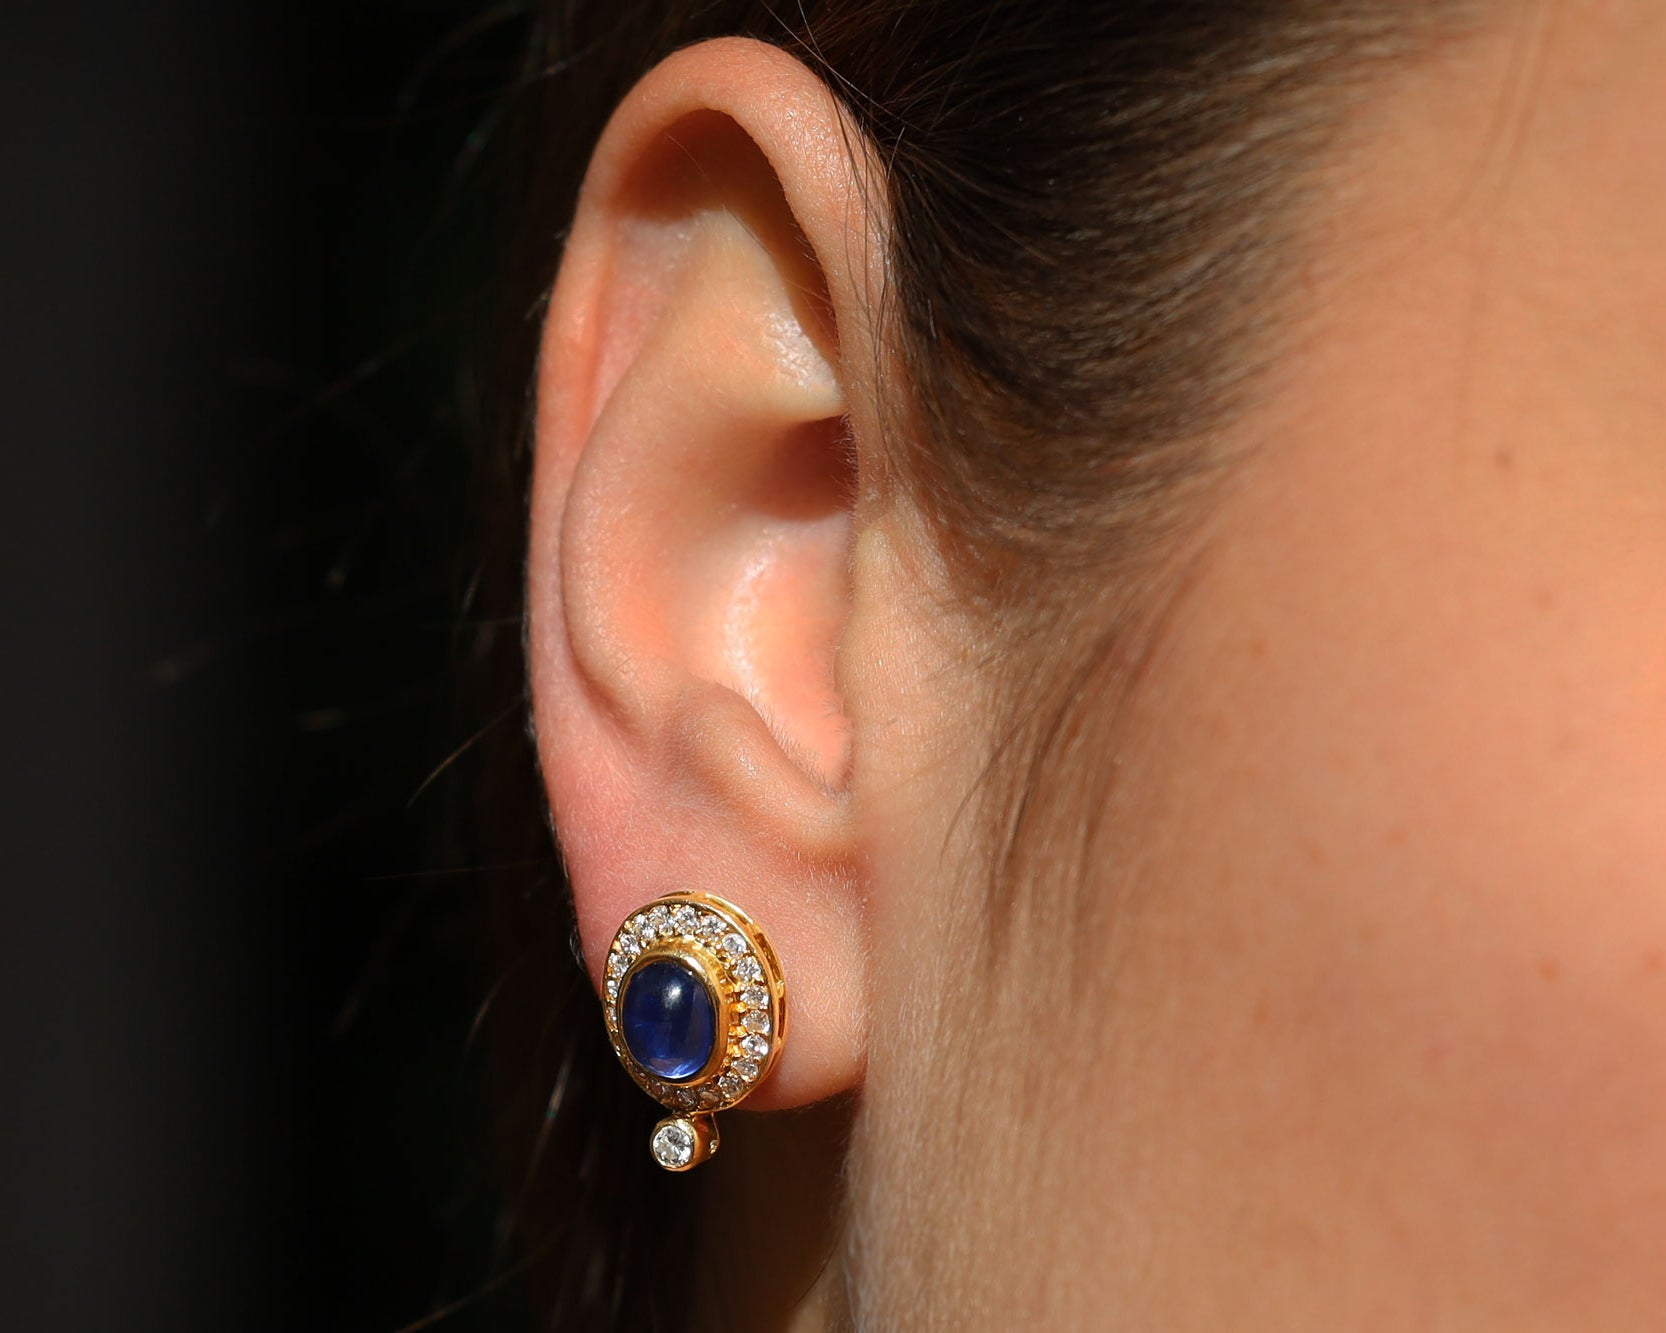 Vintage 3 Carat Cabochon Sapphire and Diamond Earrings